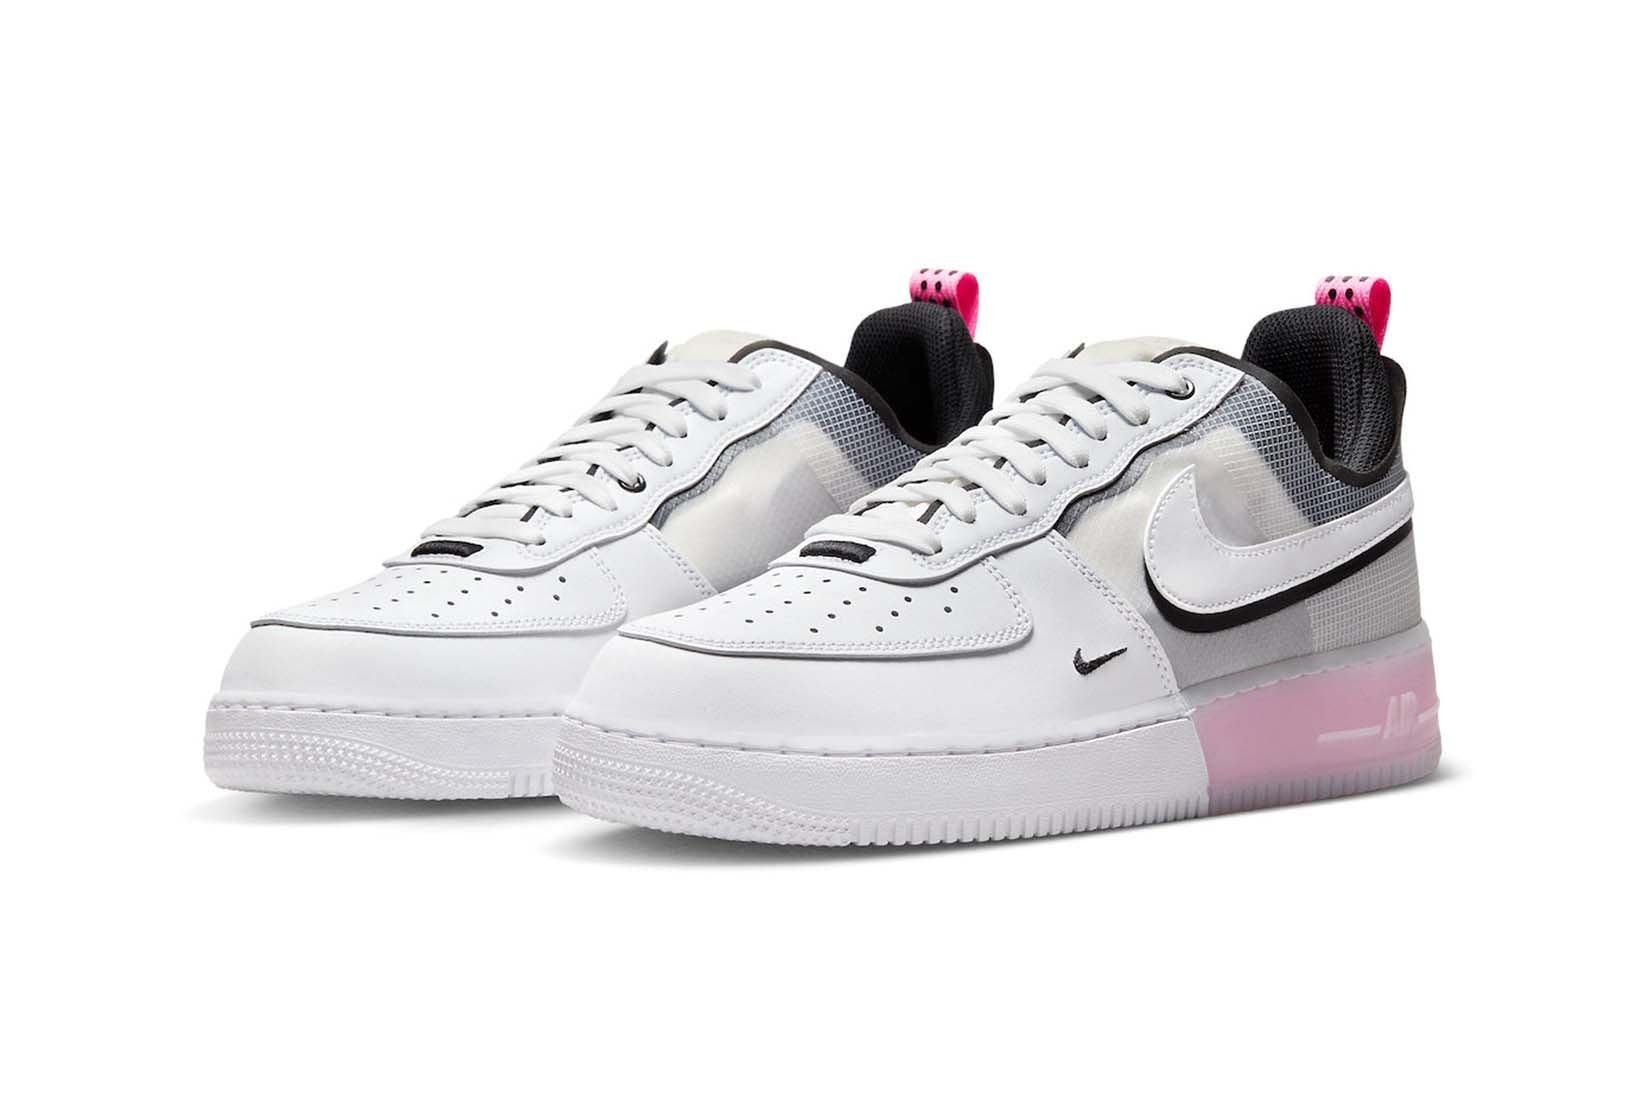 Nike Air Force 1 React Black White Pink Spell dv0808-100 Release Date